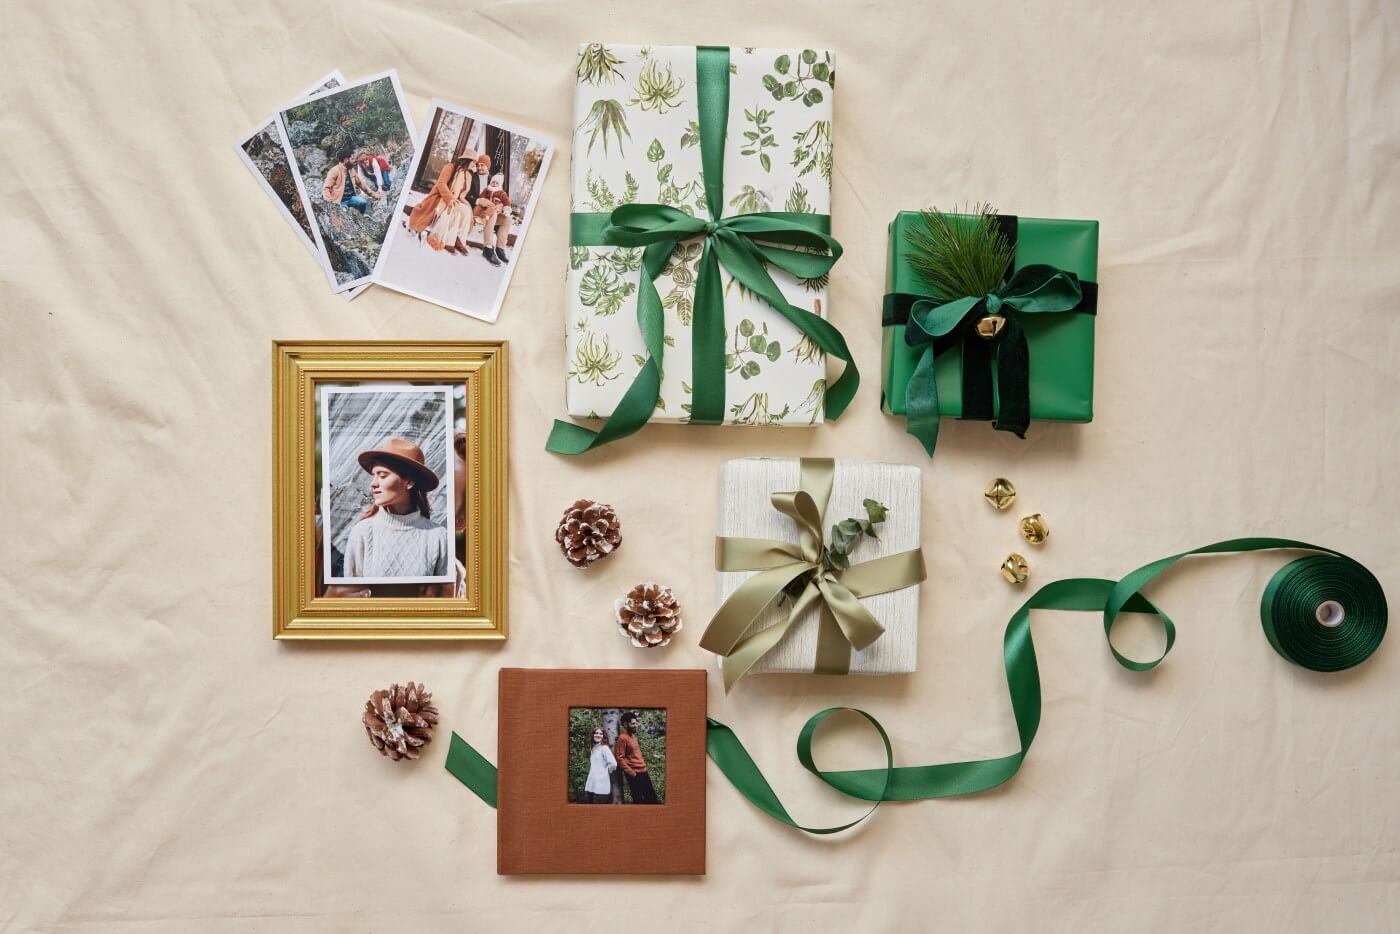 Last Minute Holiday Photo Gifts | Printique Hacks